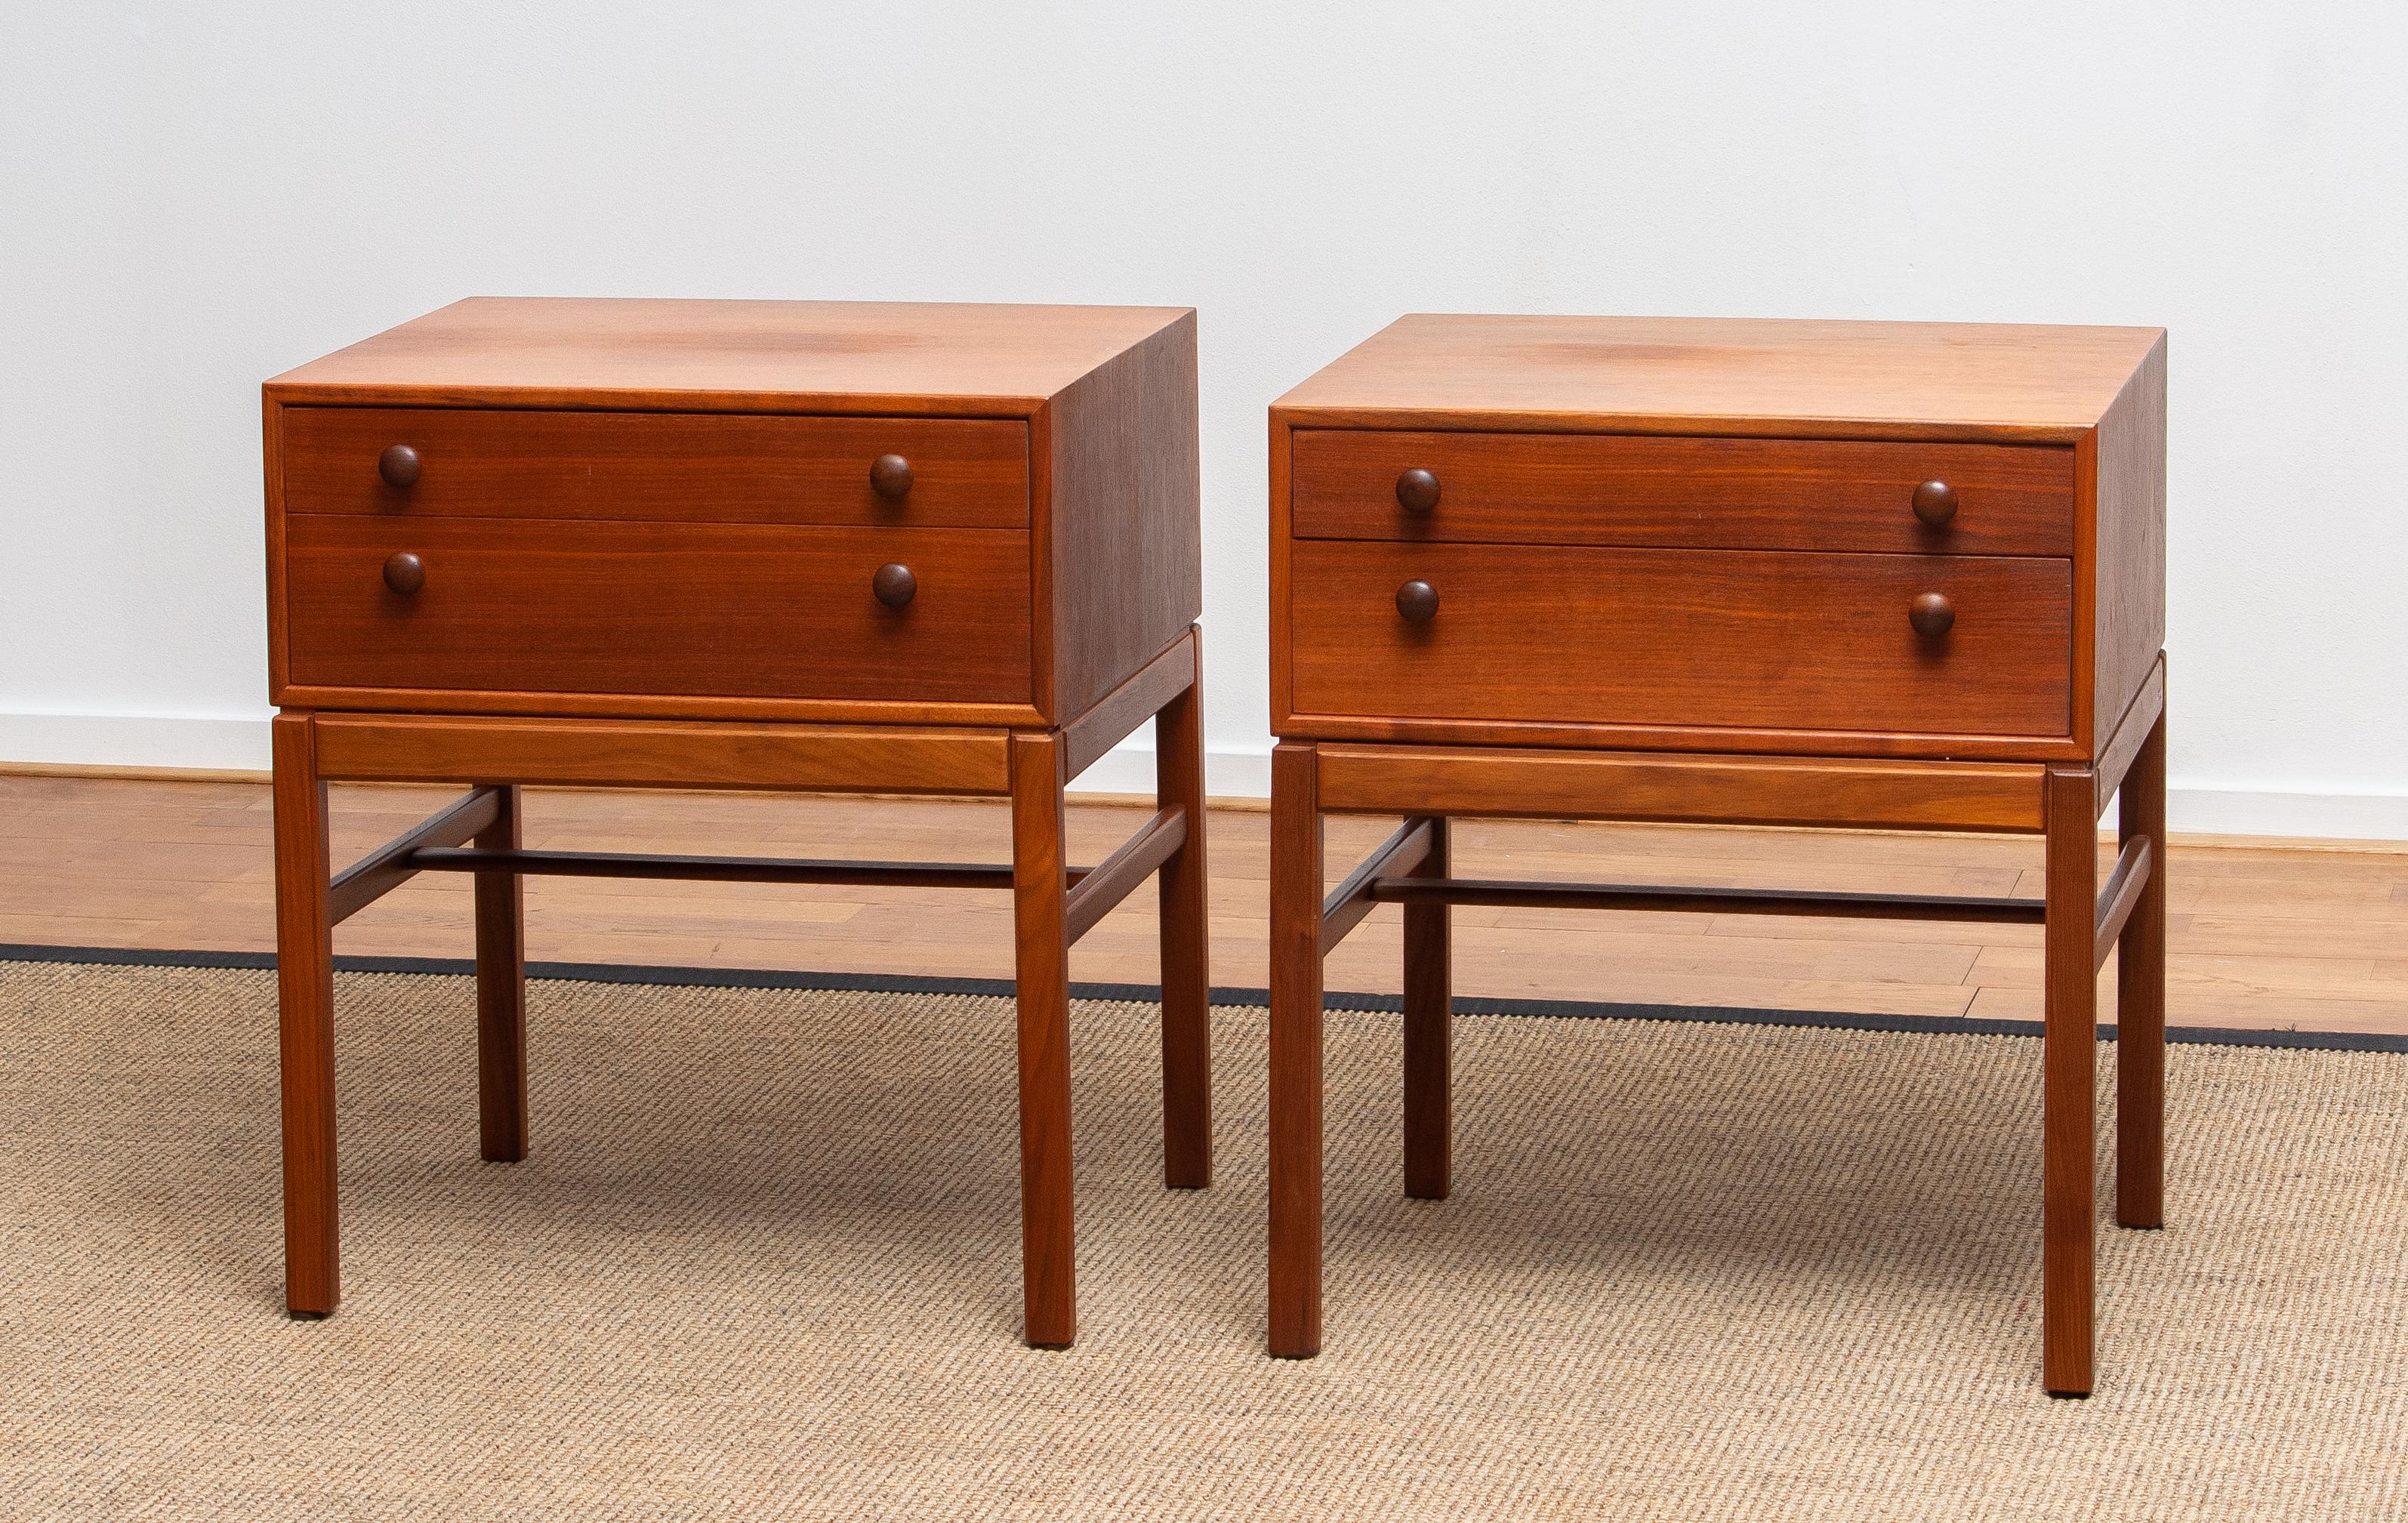 Beautiful set of two teak nightstands - side tables designed by Sven Engström & Gunnar Myrstrand for Tingström Möbelfabriks Sweden.
They are from the flexible 'Casino' collection.
You can lift the top with the two drawers from the stand.
They are